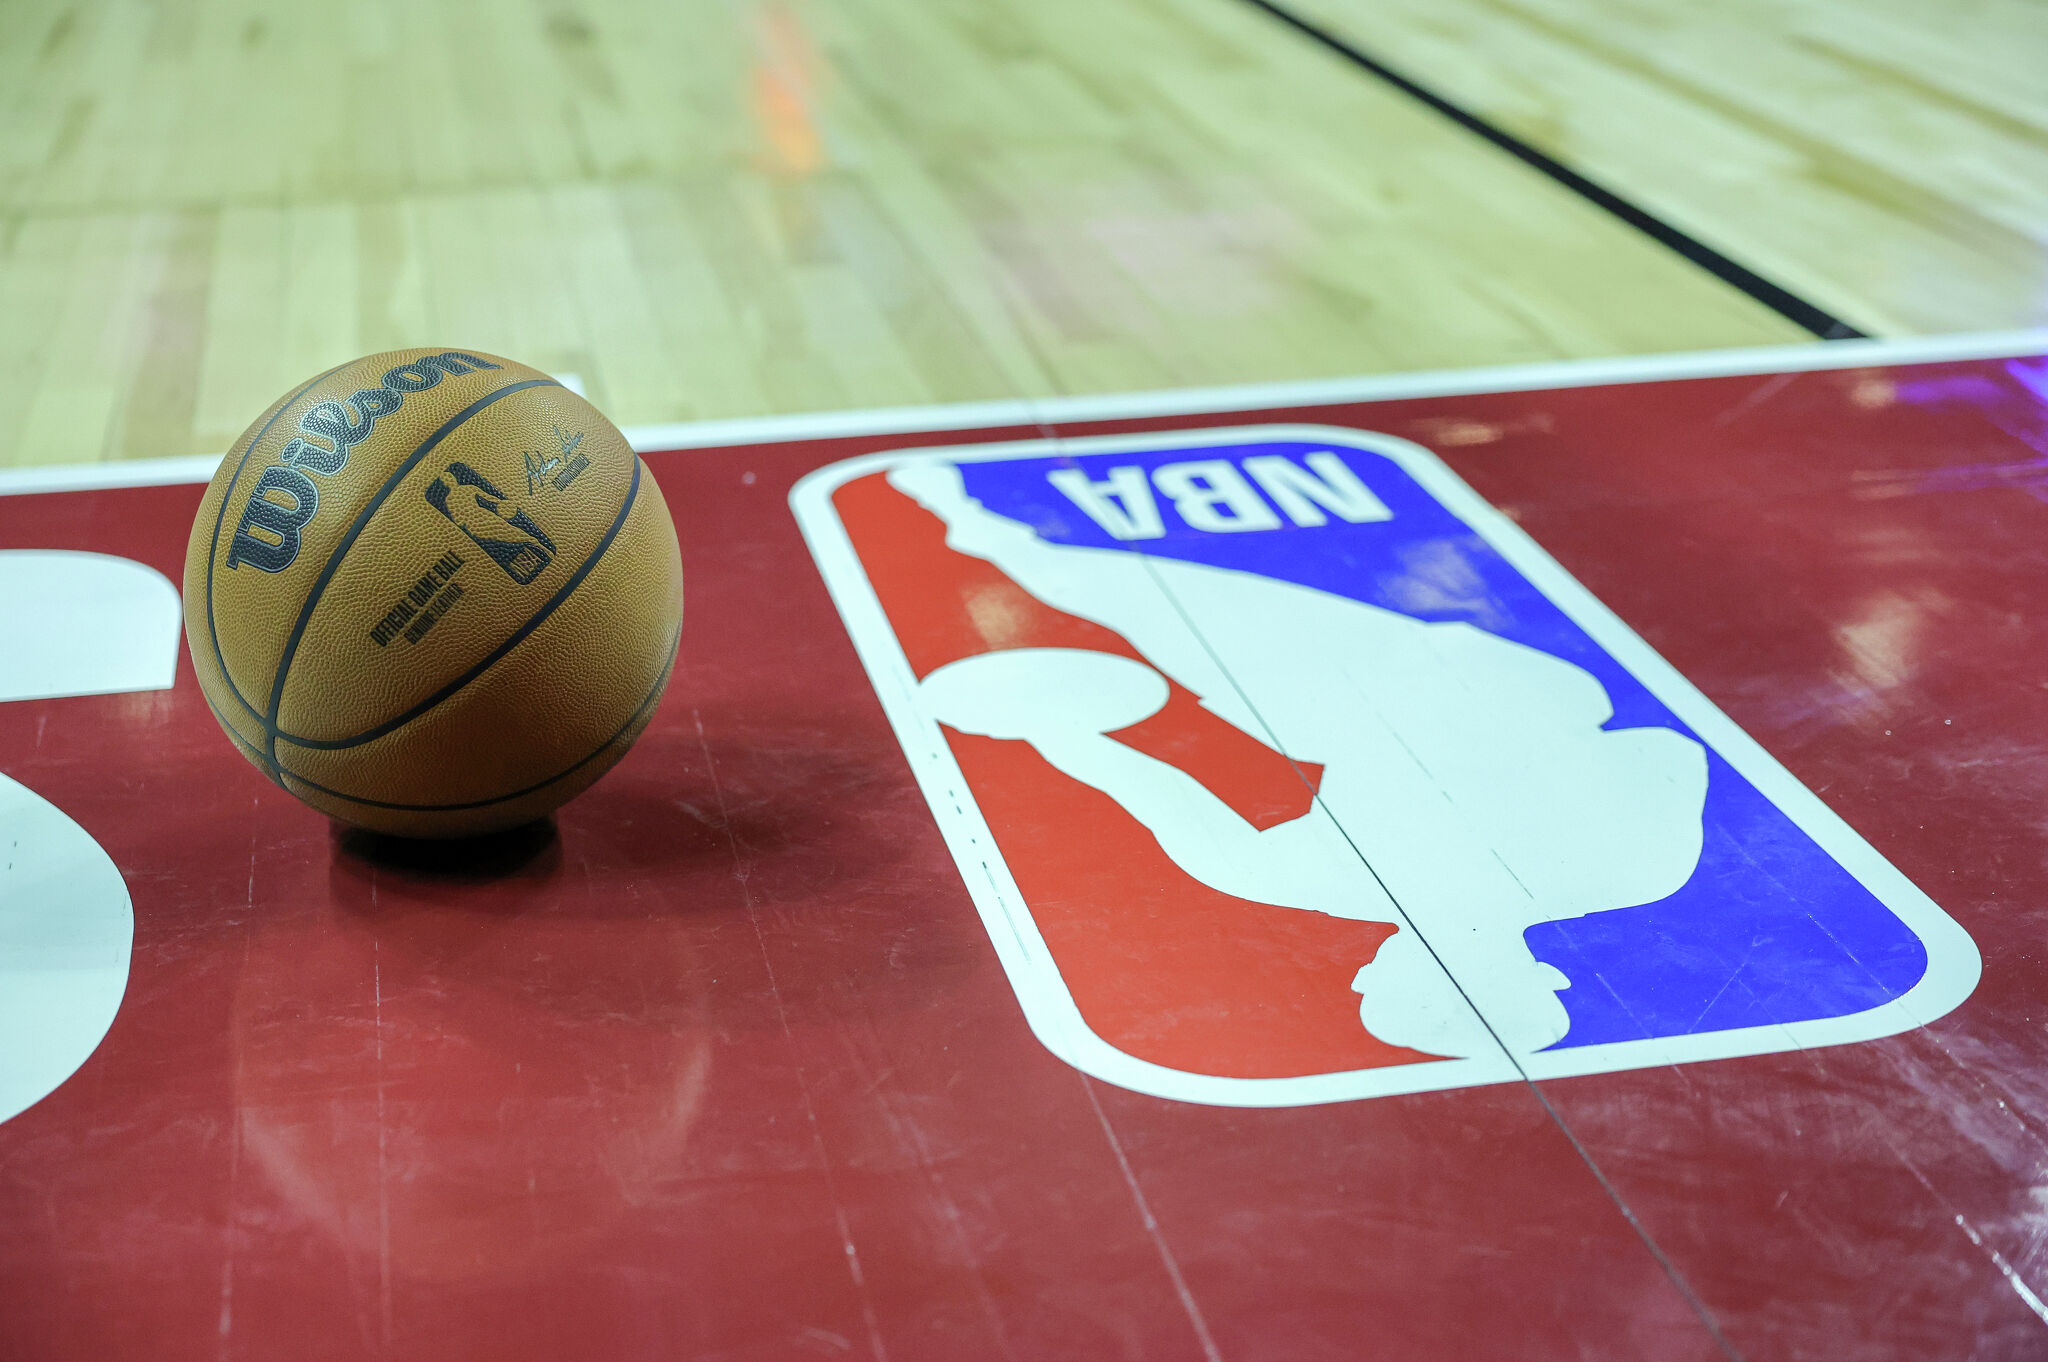 How to watch NBA 2023: channels, streaming and schedule